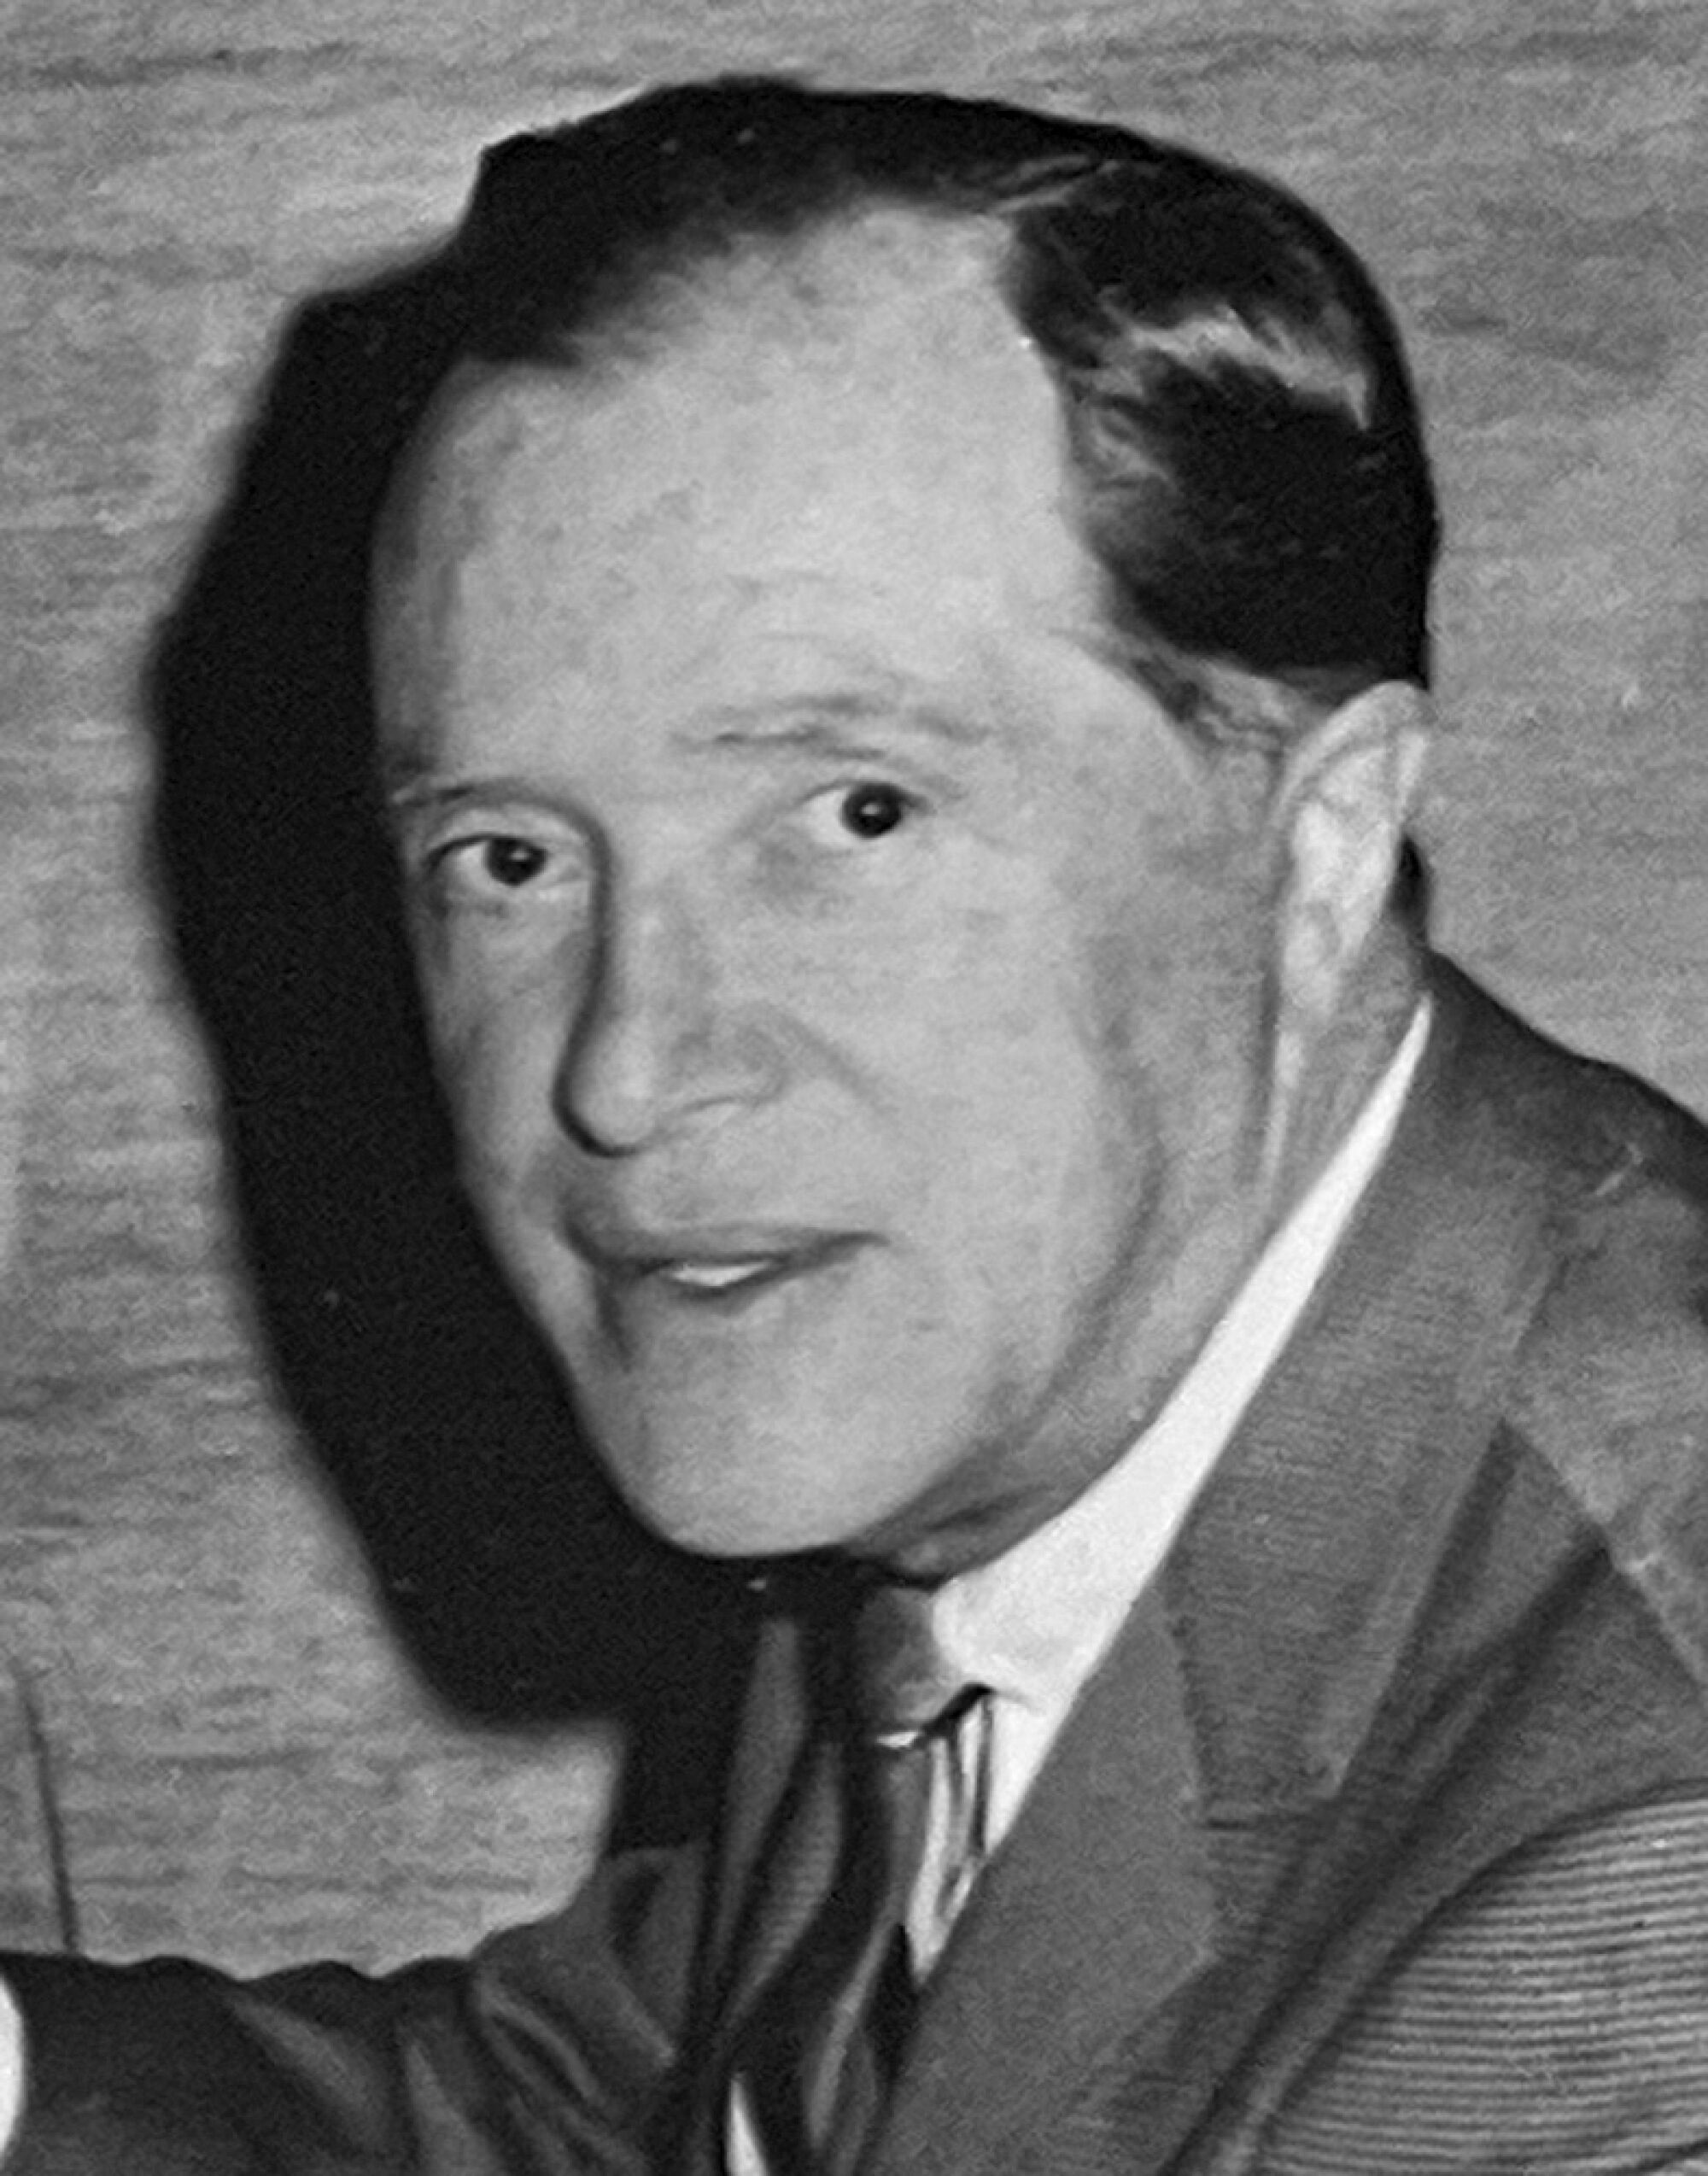 black and white headshot of a man in suit and tie